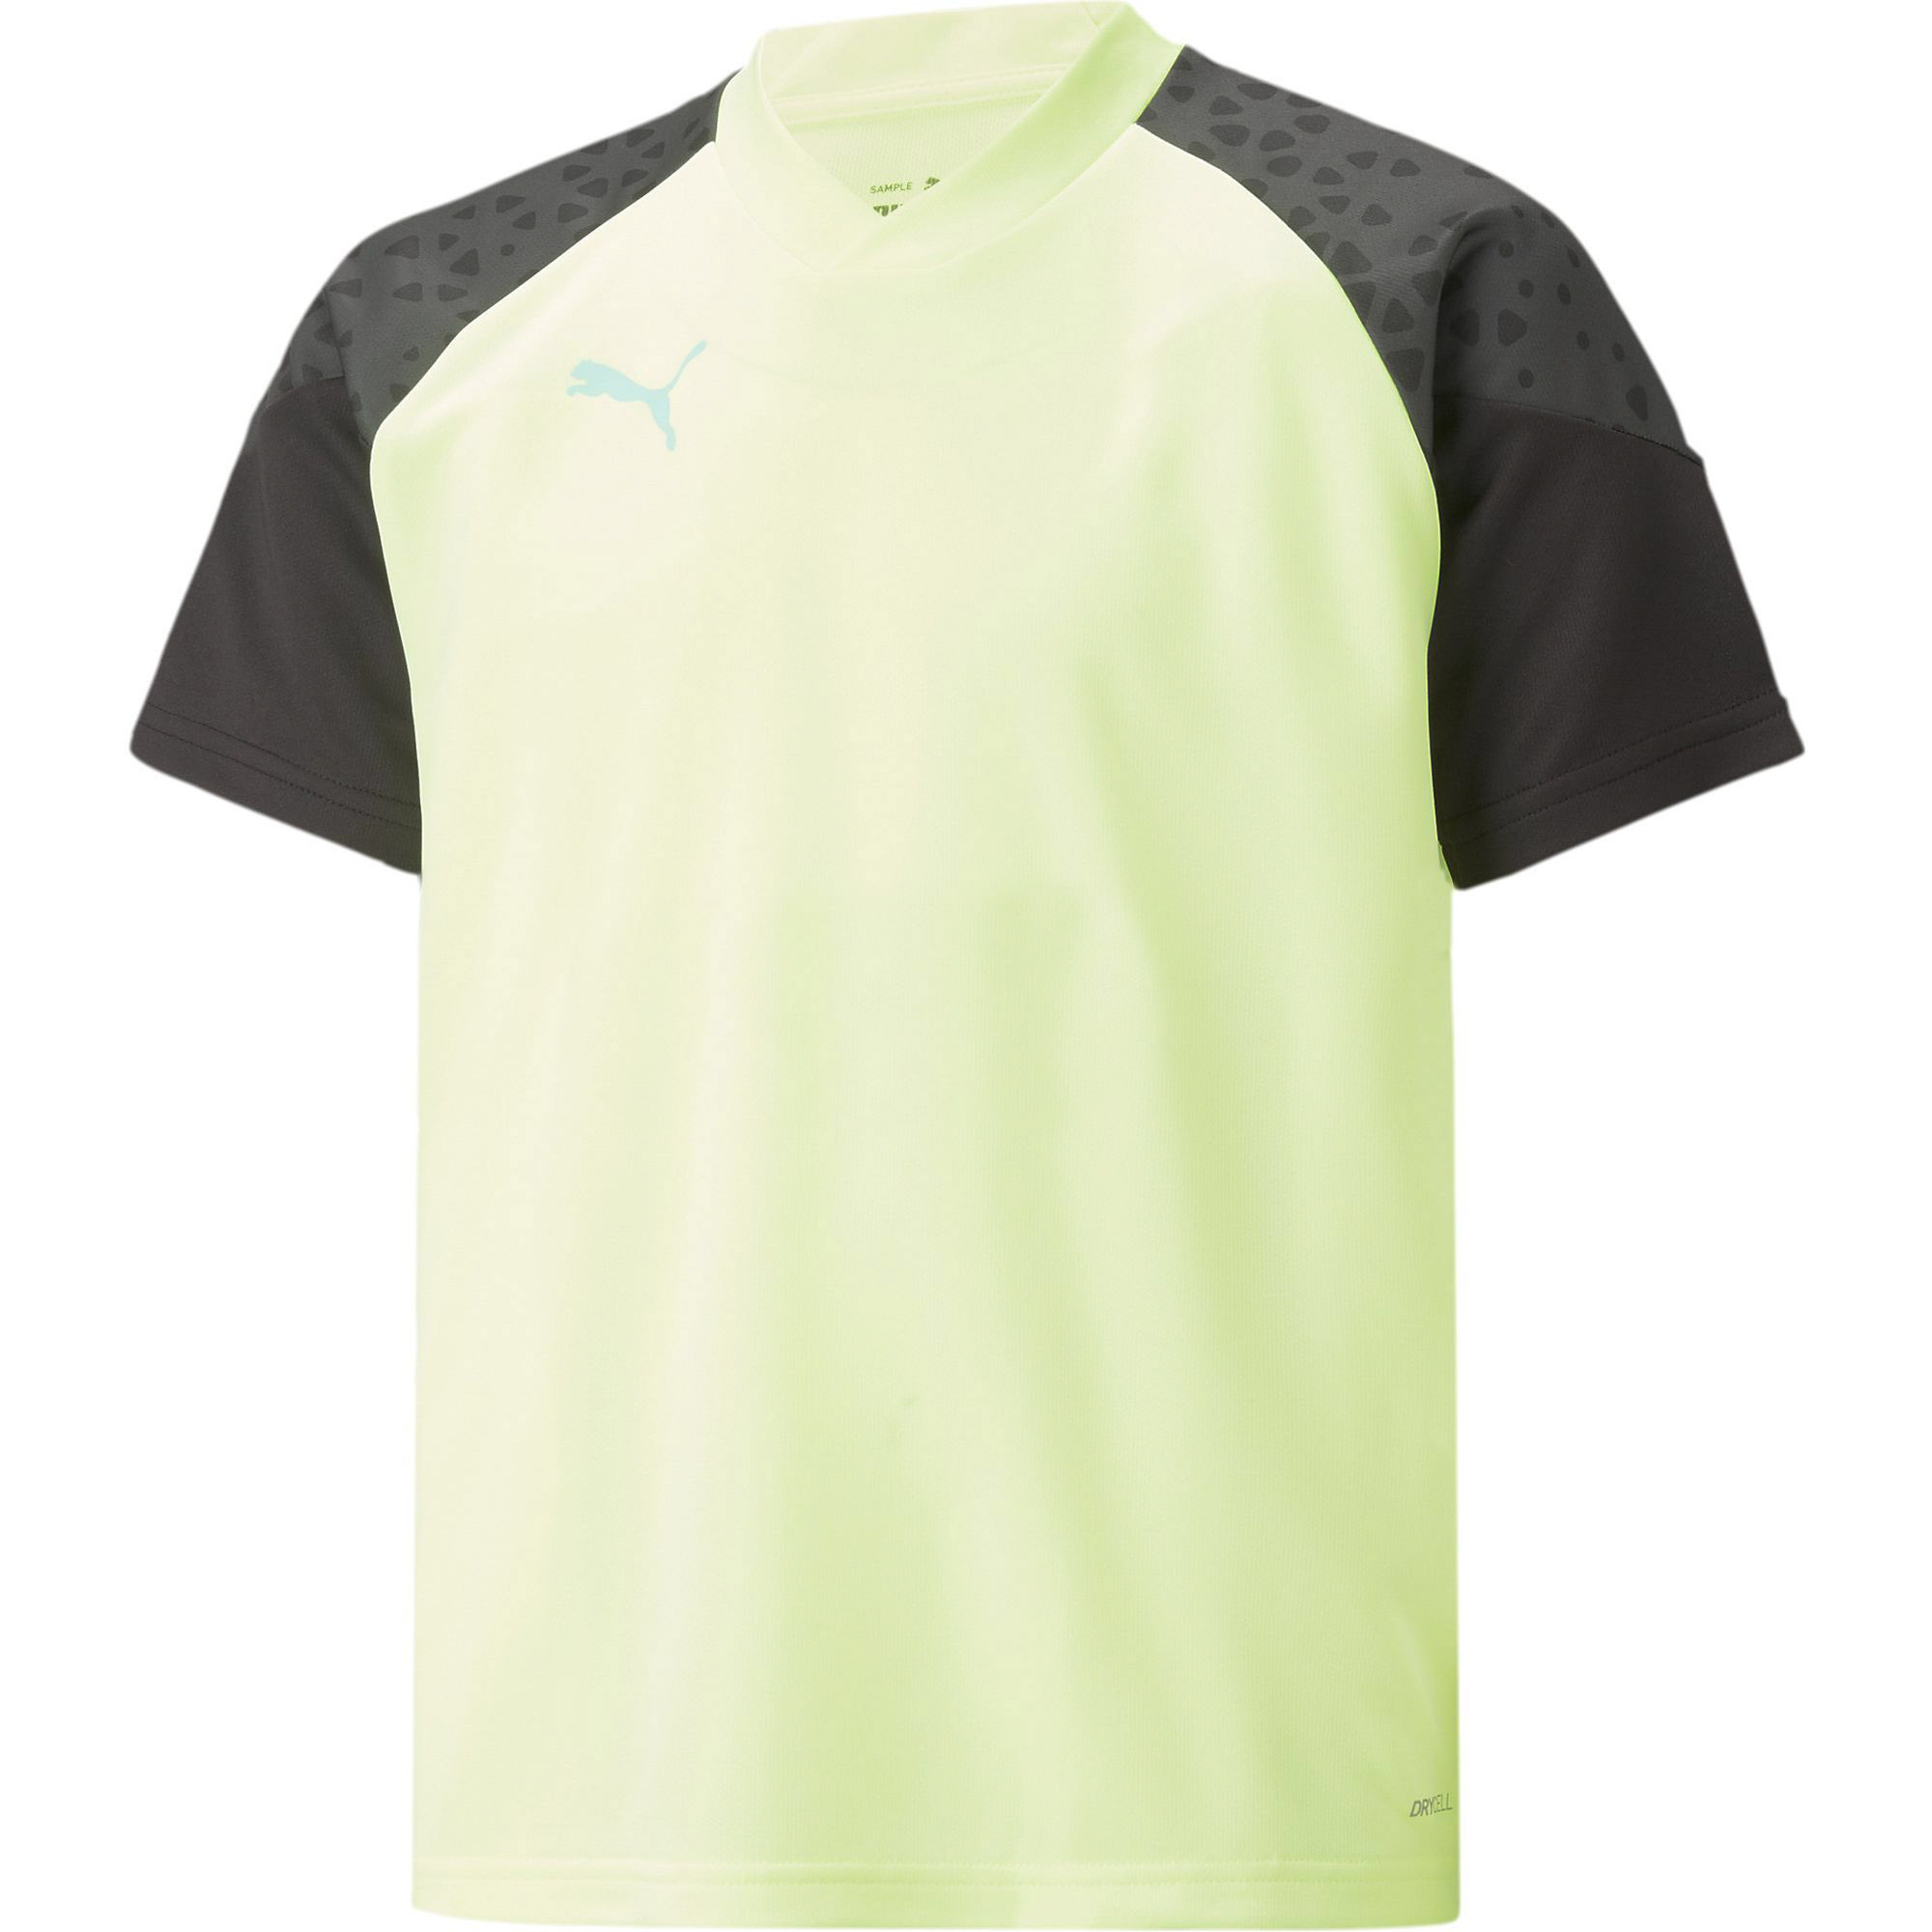 individualCUP Training Jersey jr